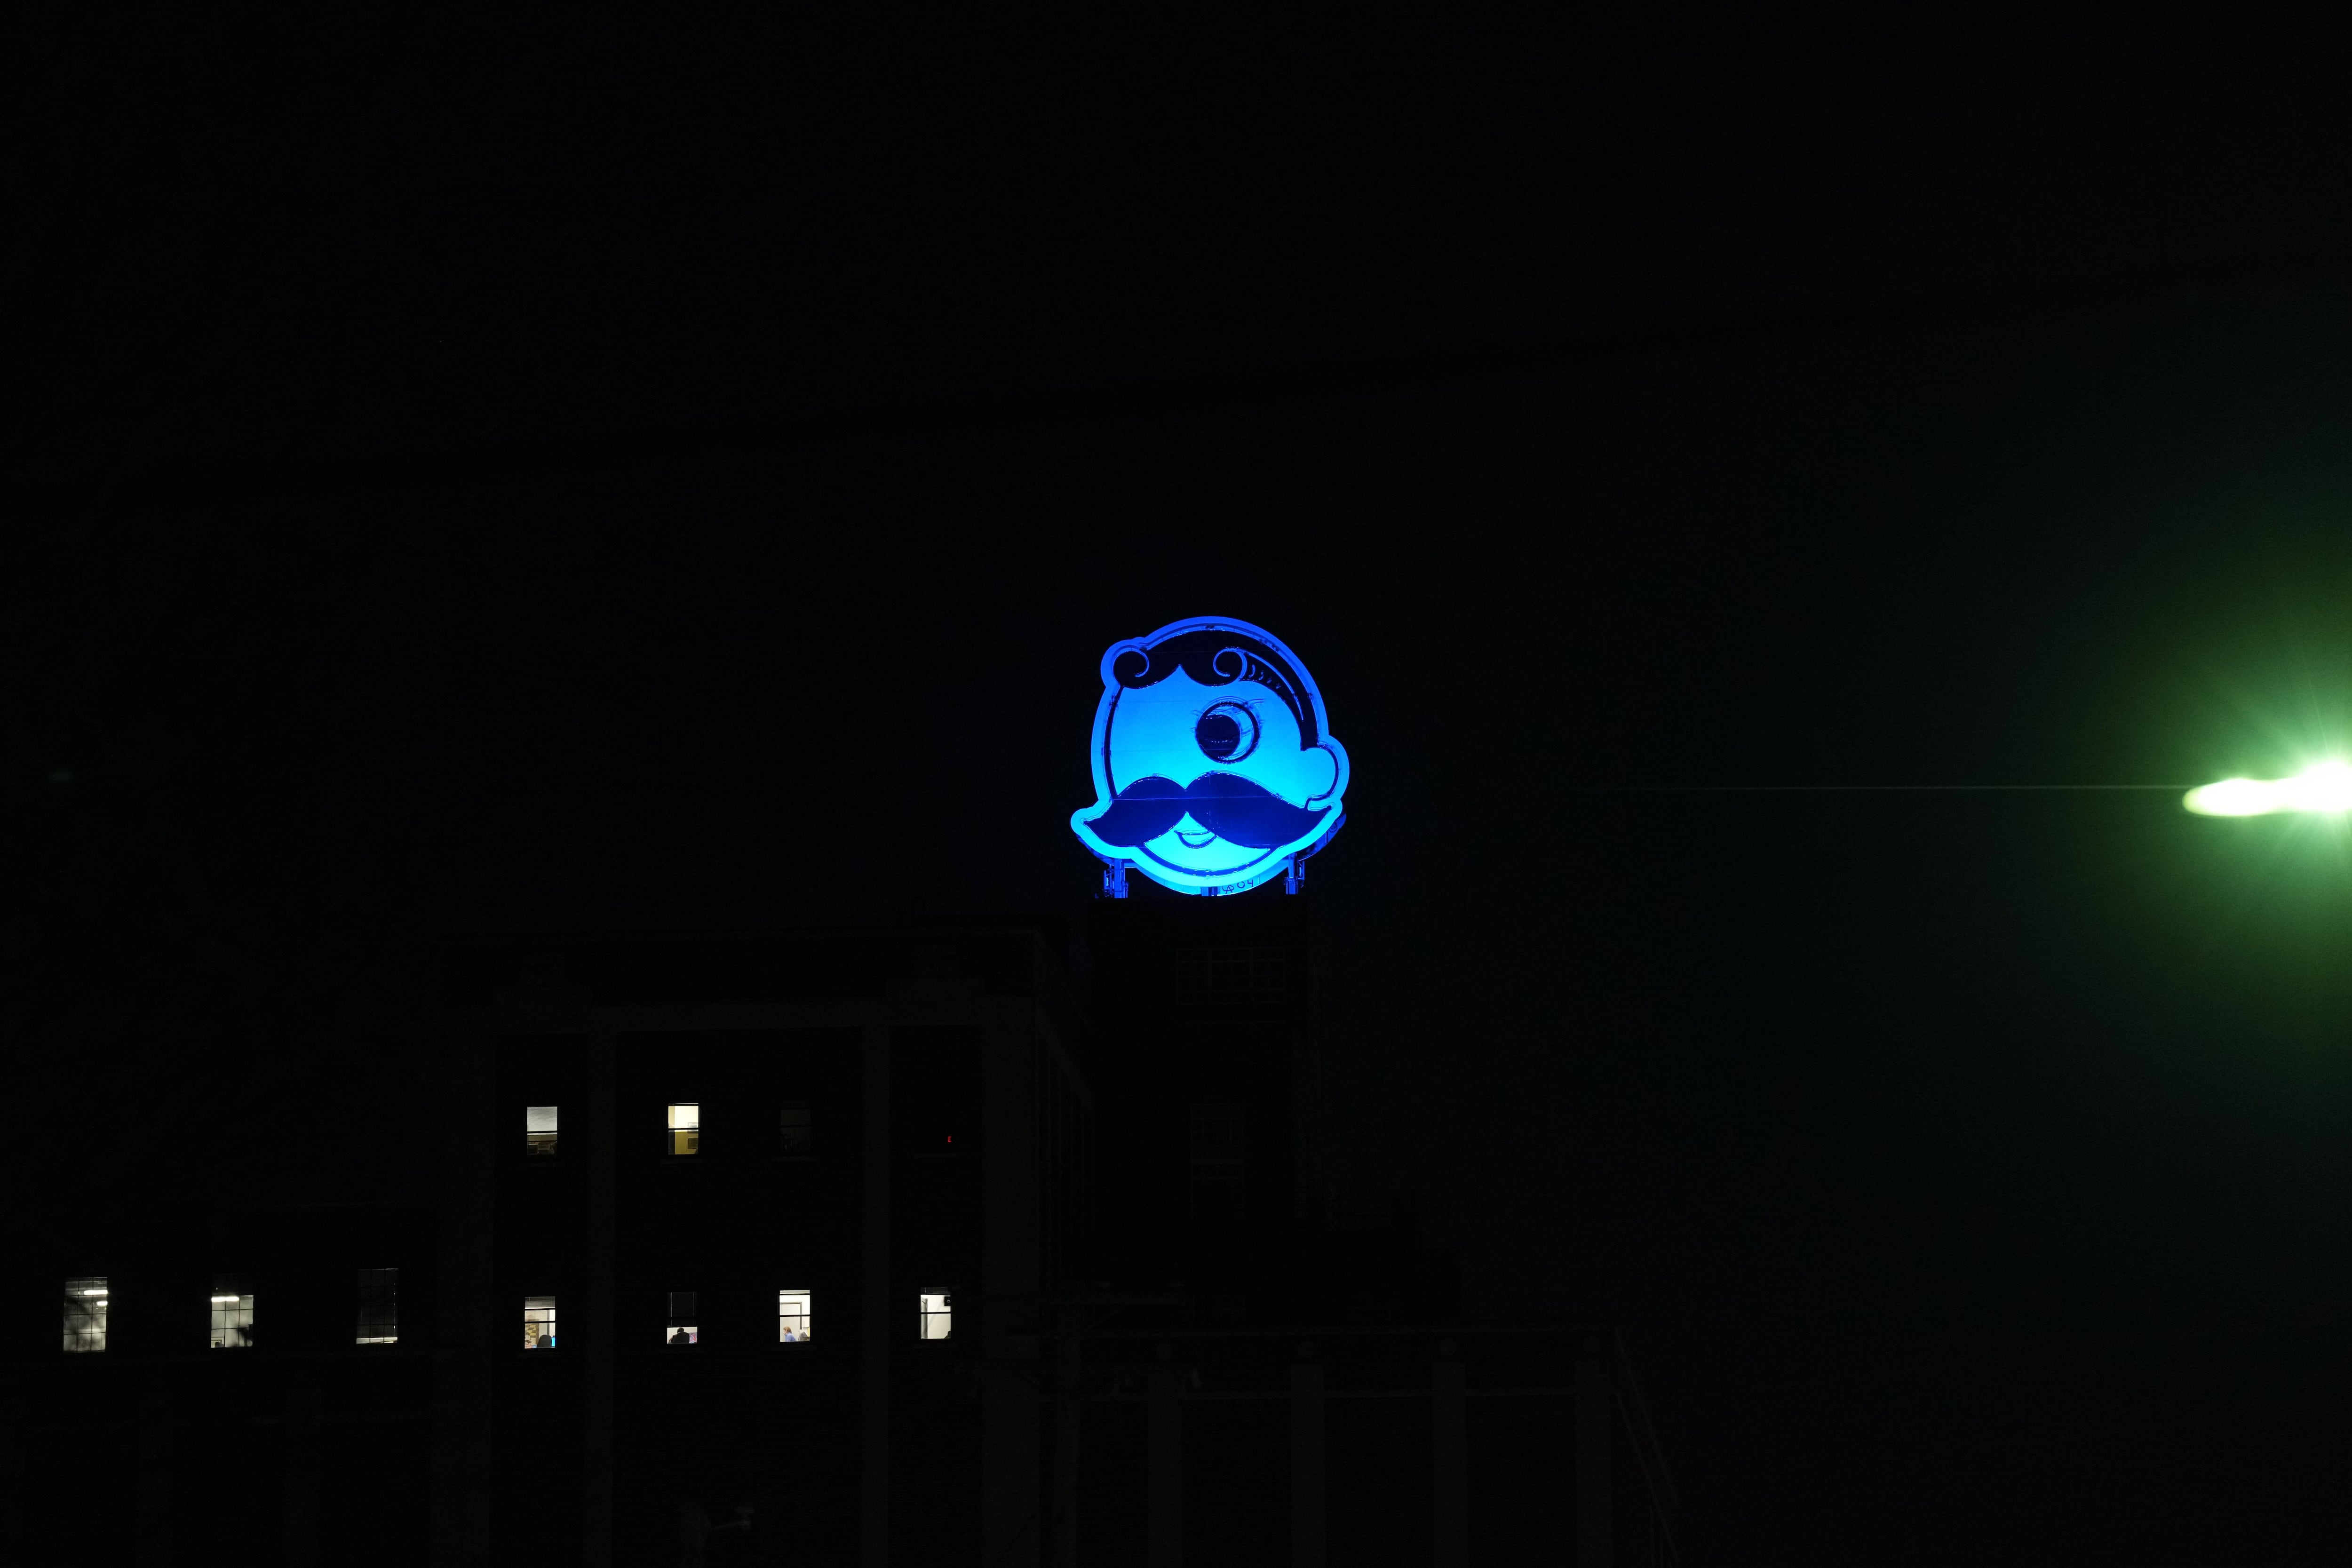 The neon Natty Boh logo glows blue at the top of the former National Brewing Company plant in Brewers Hill.